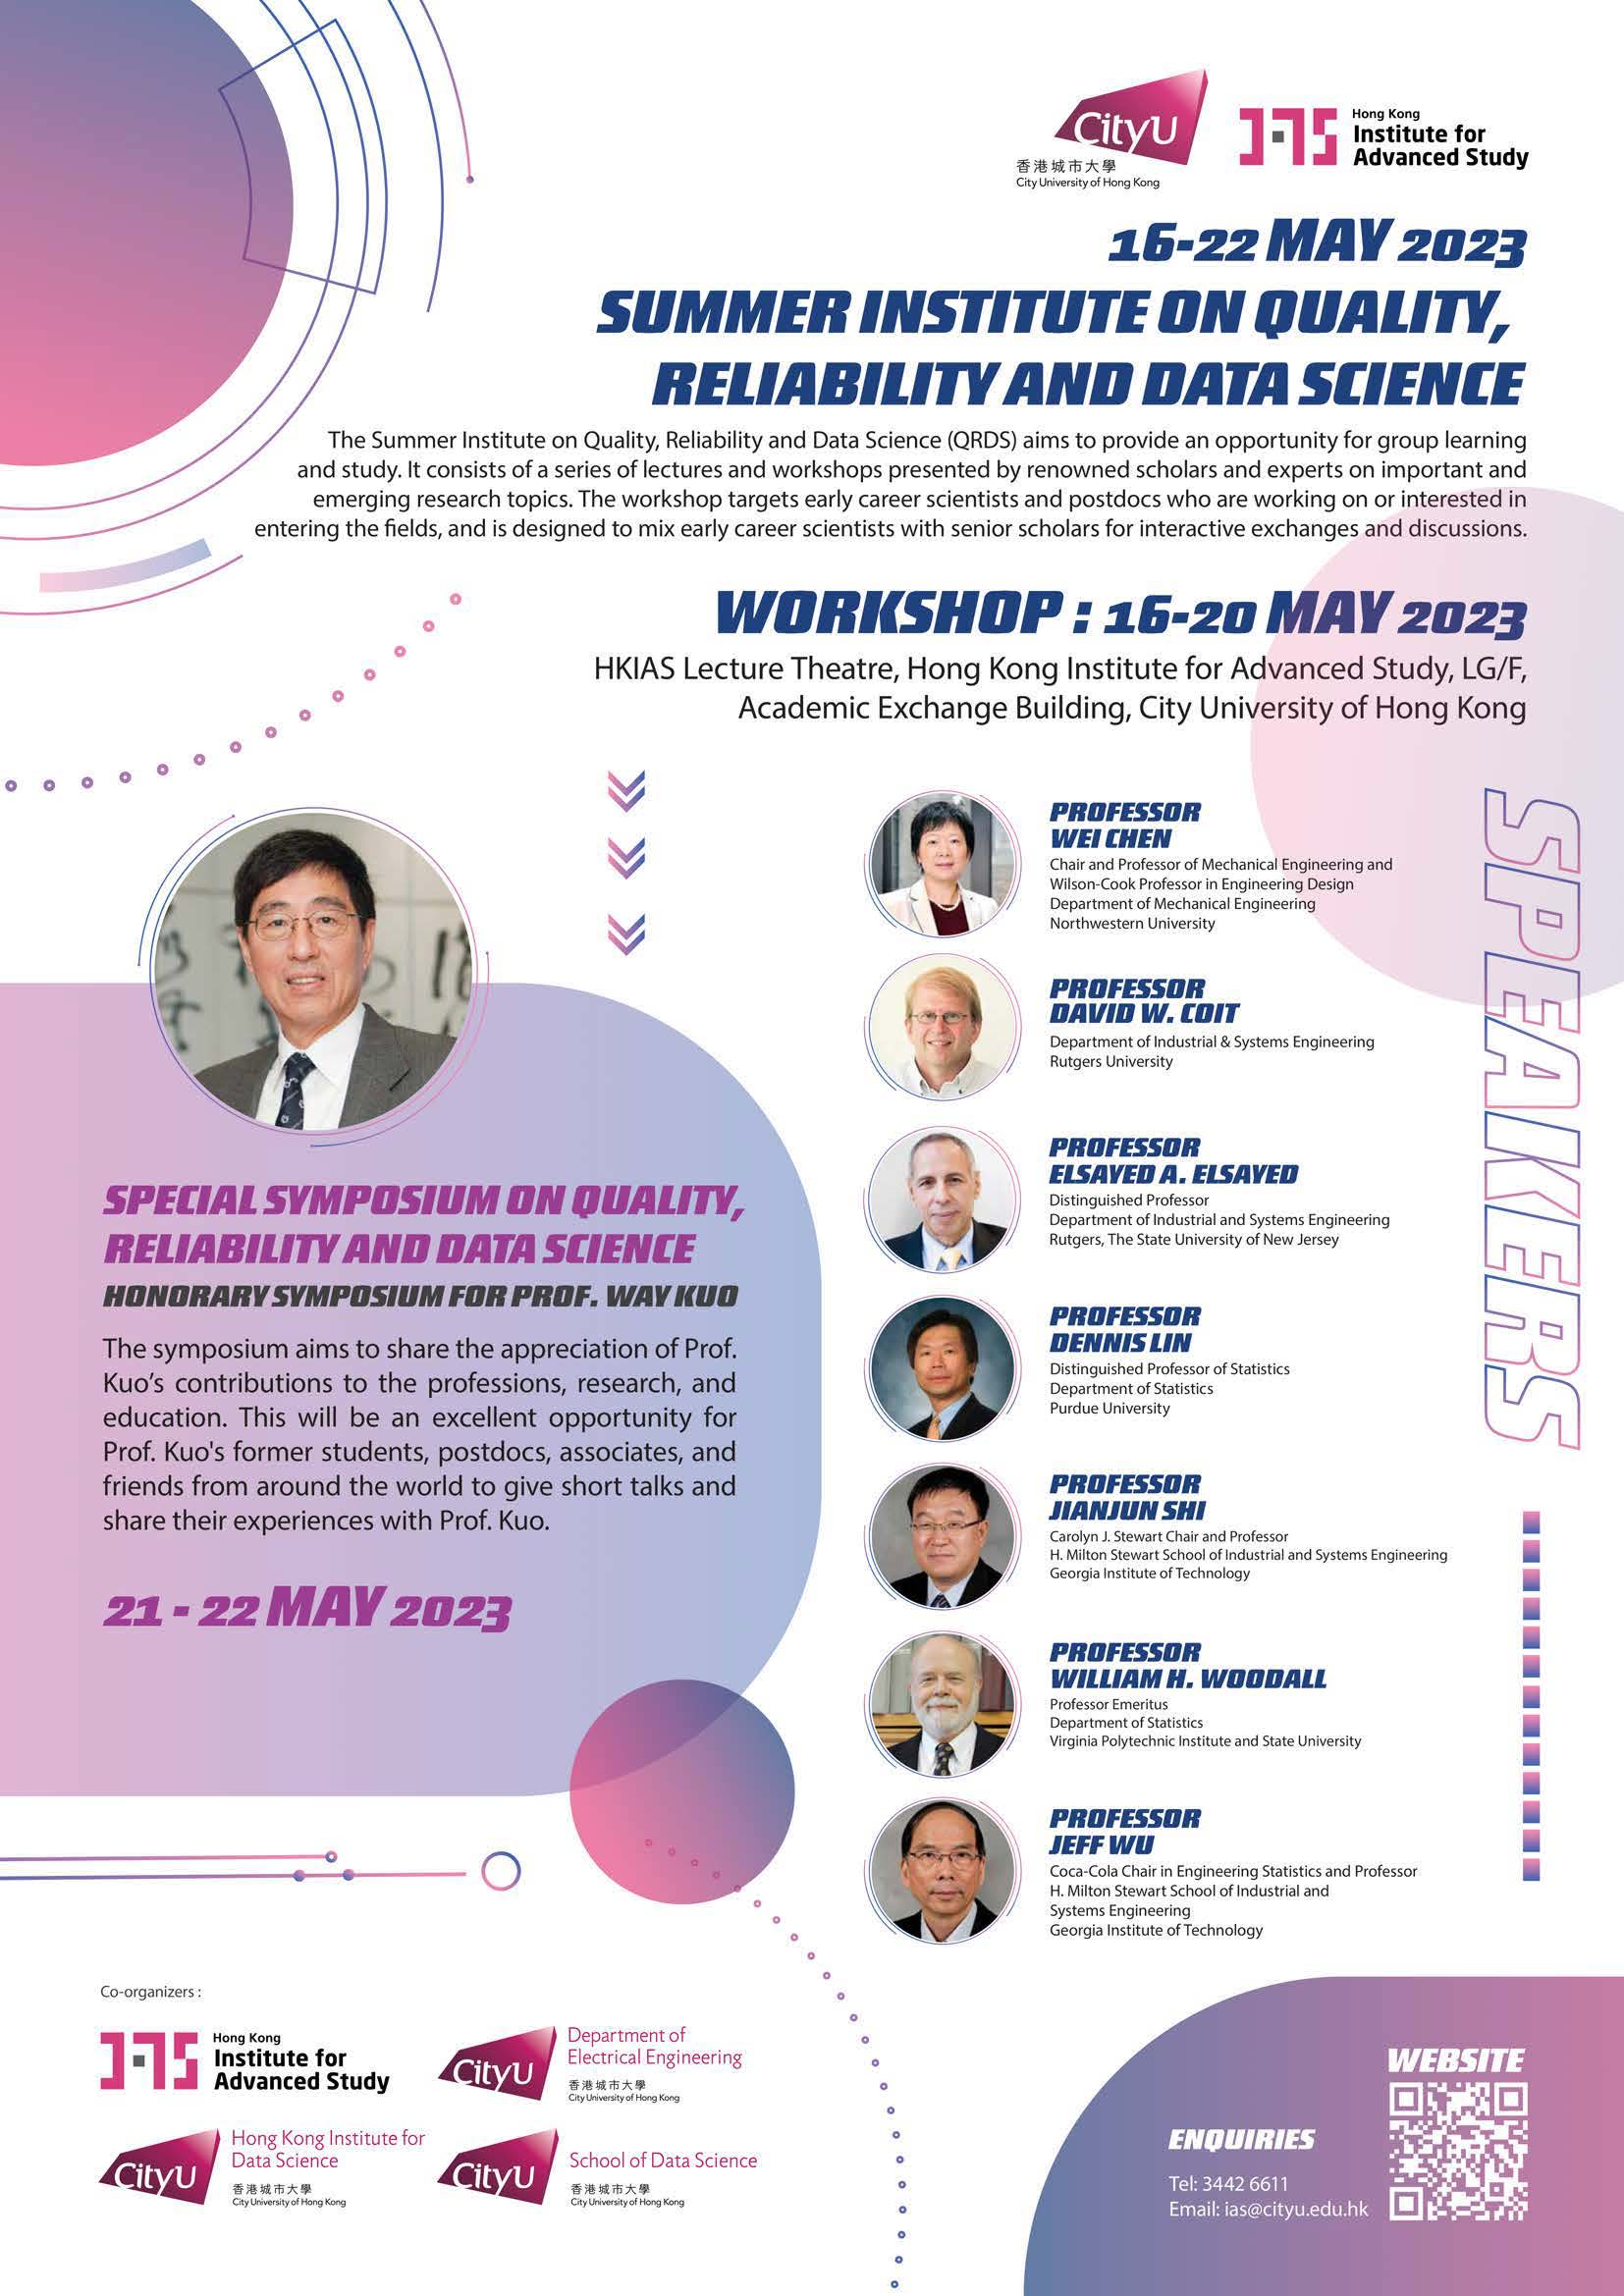 Summer Institute on Quality, Reliability and Data Science